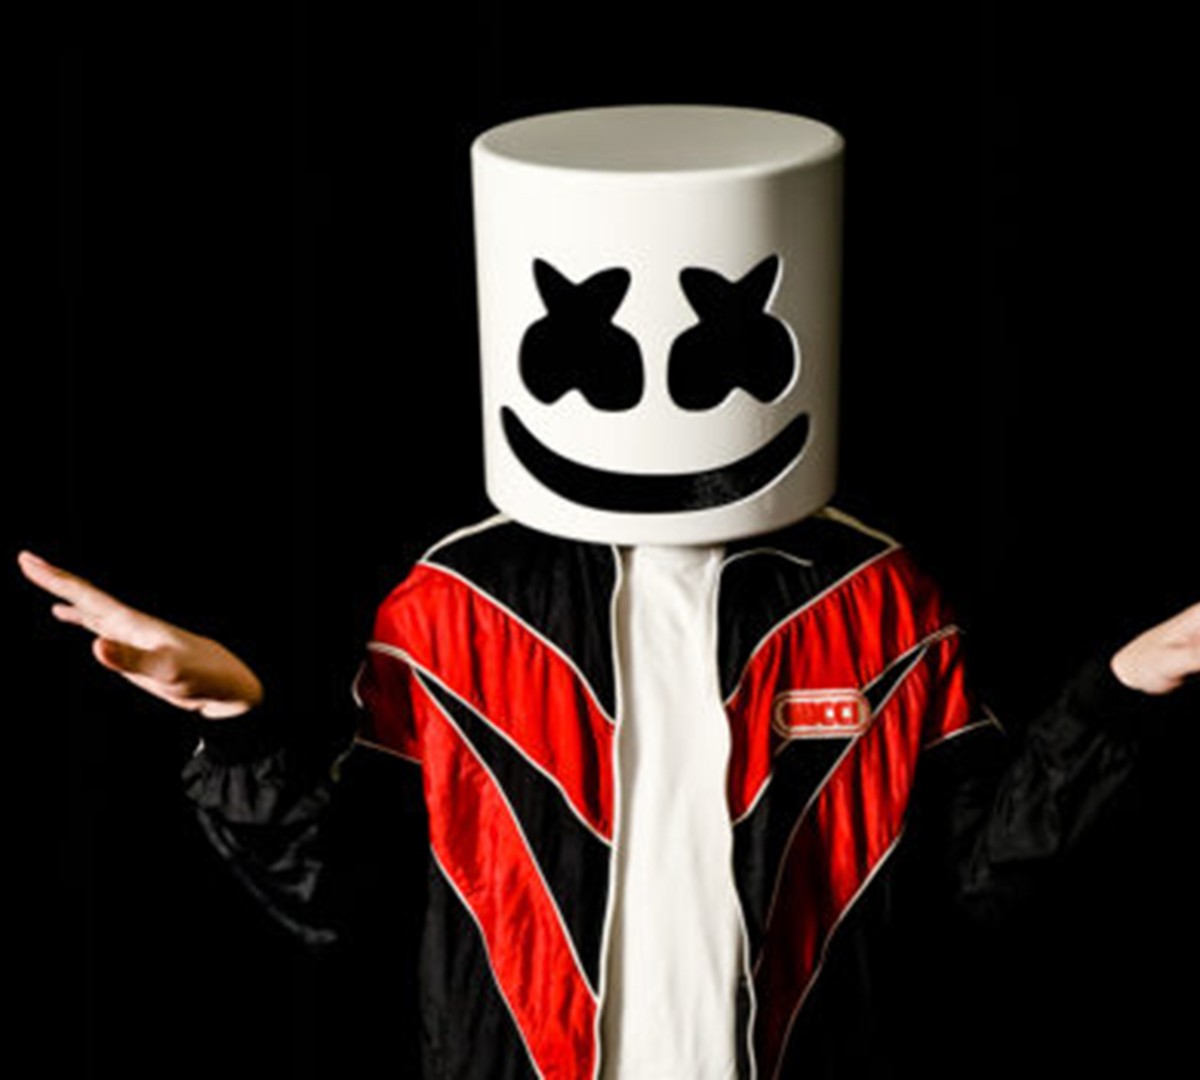 Marshmello to Headline iHeartRadio FanFest 2019 During Canadian Music Week in Toronto, May 8